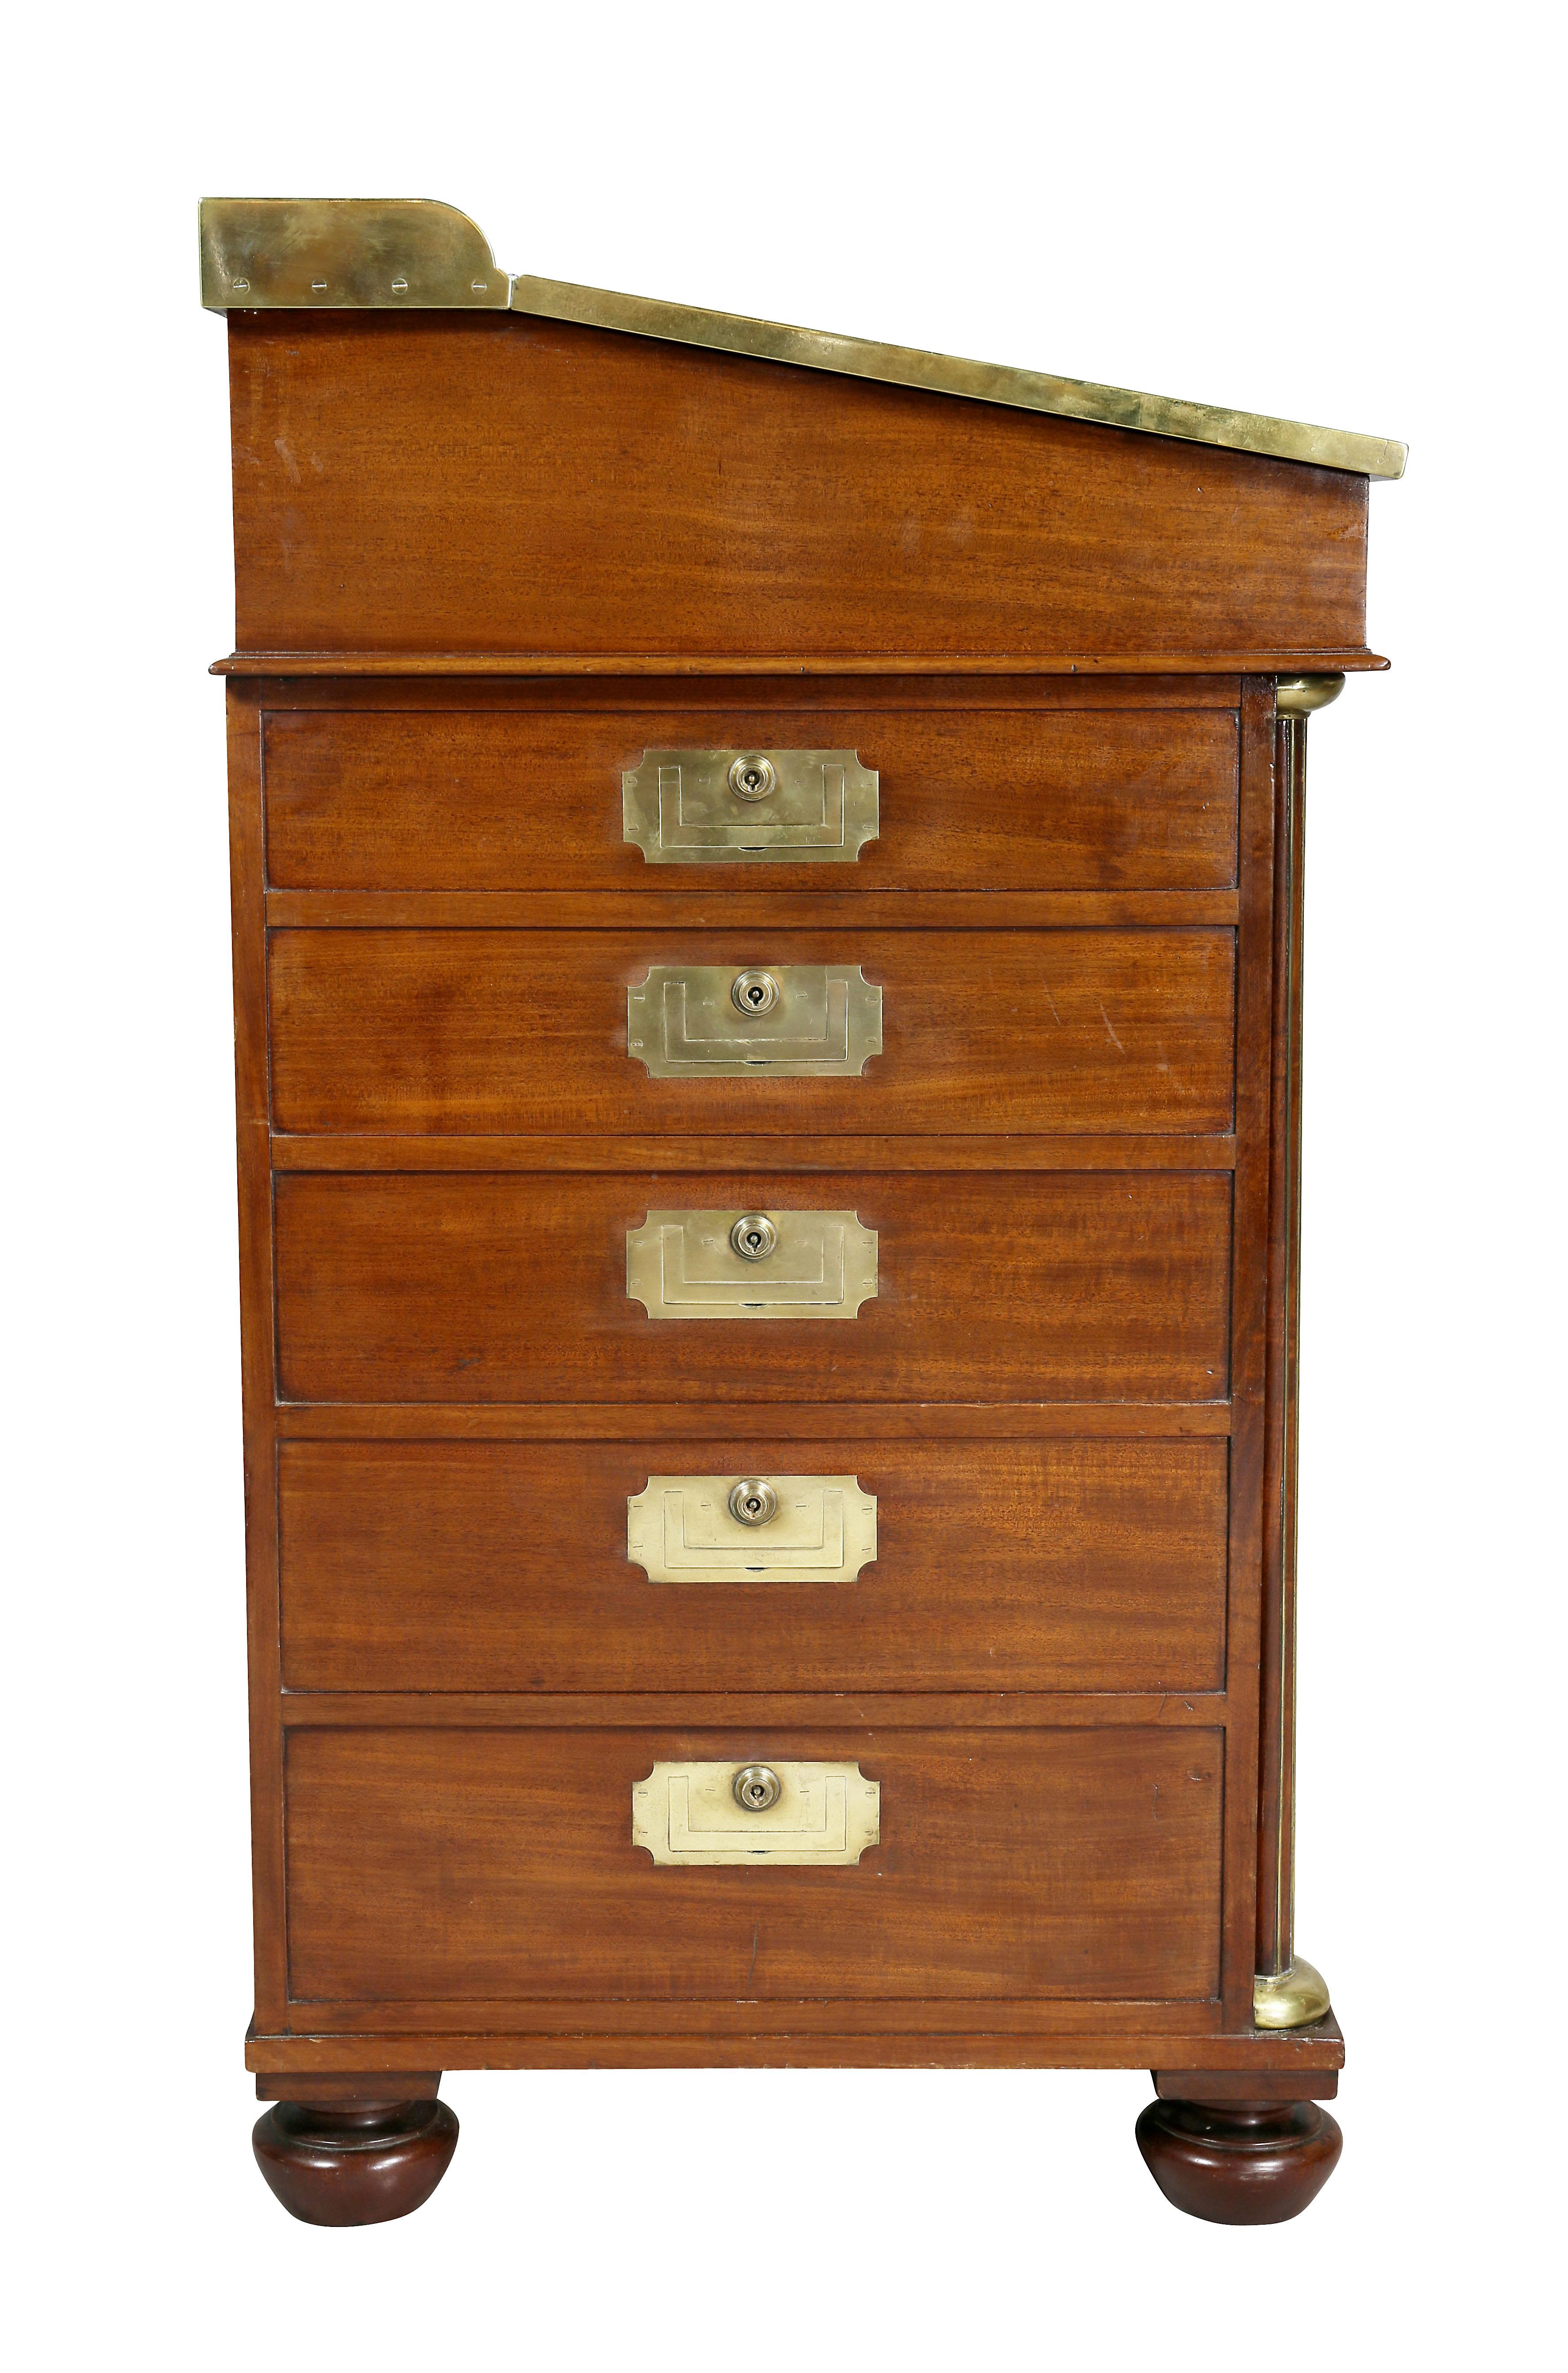 Regency Mahogany and Brass Mounted Campaign Desk 5